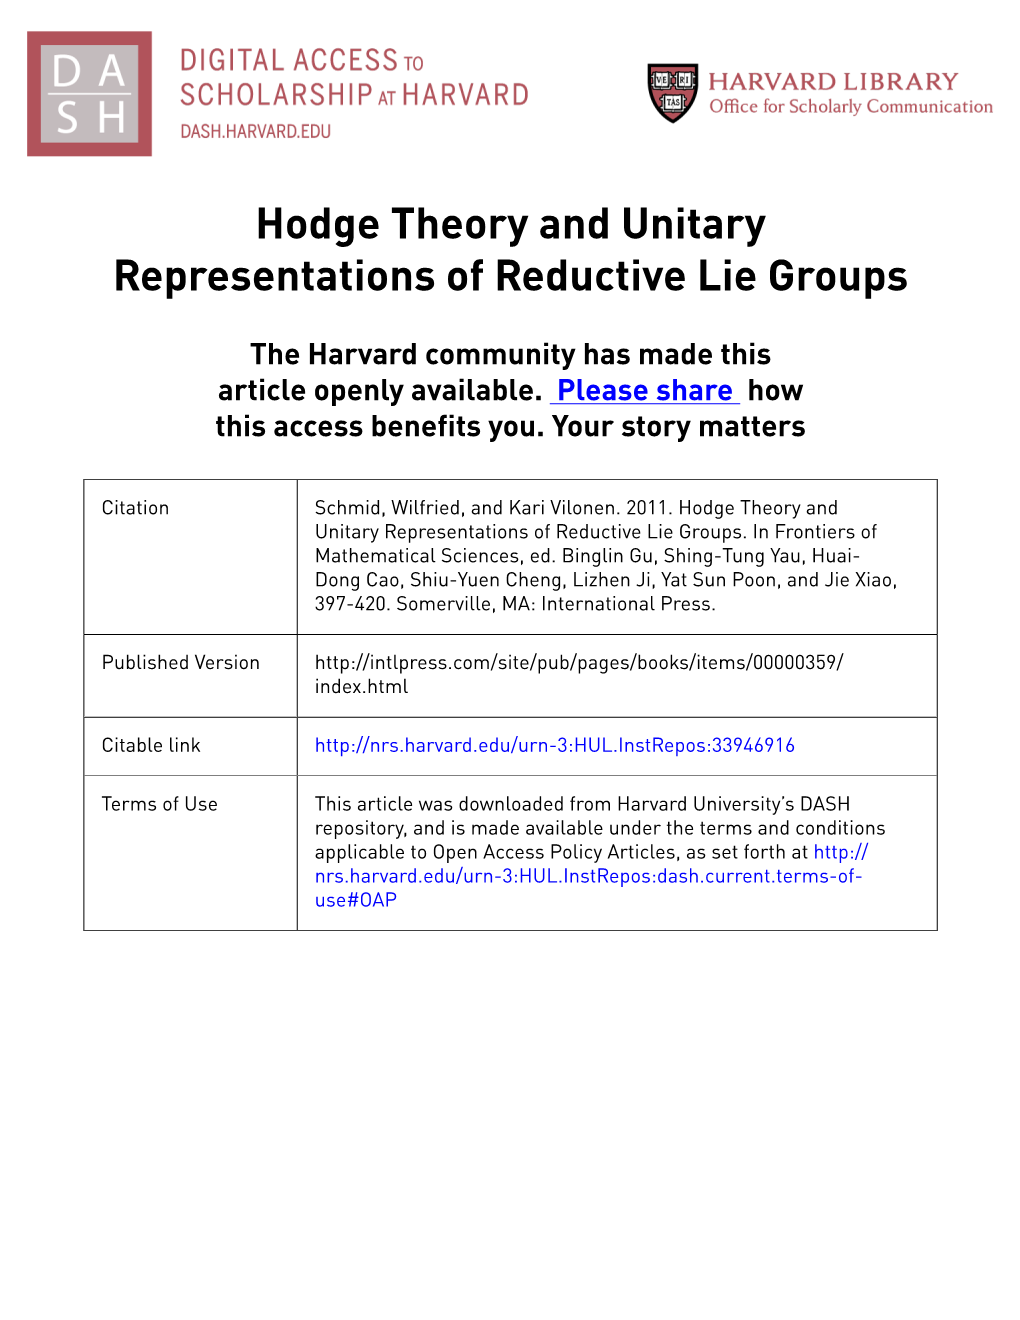 Hodge Theory and Unitary Representations of Reductive Lie Groups